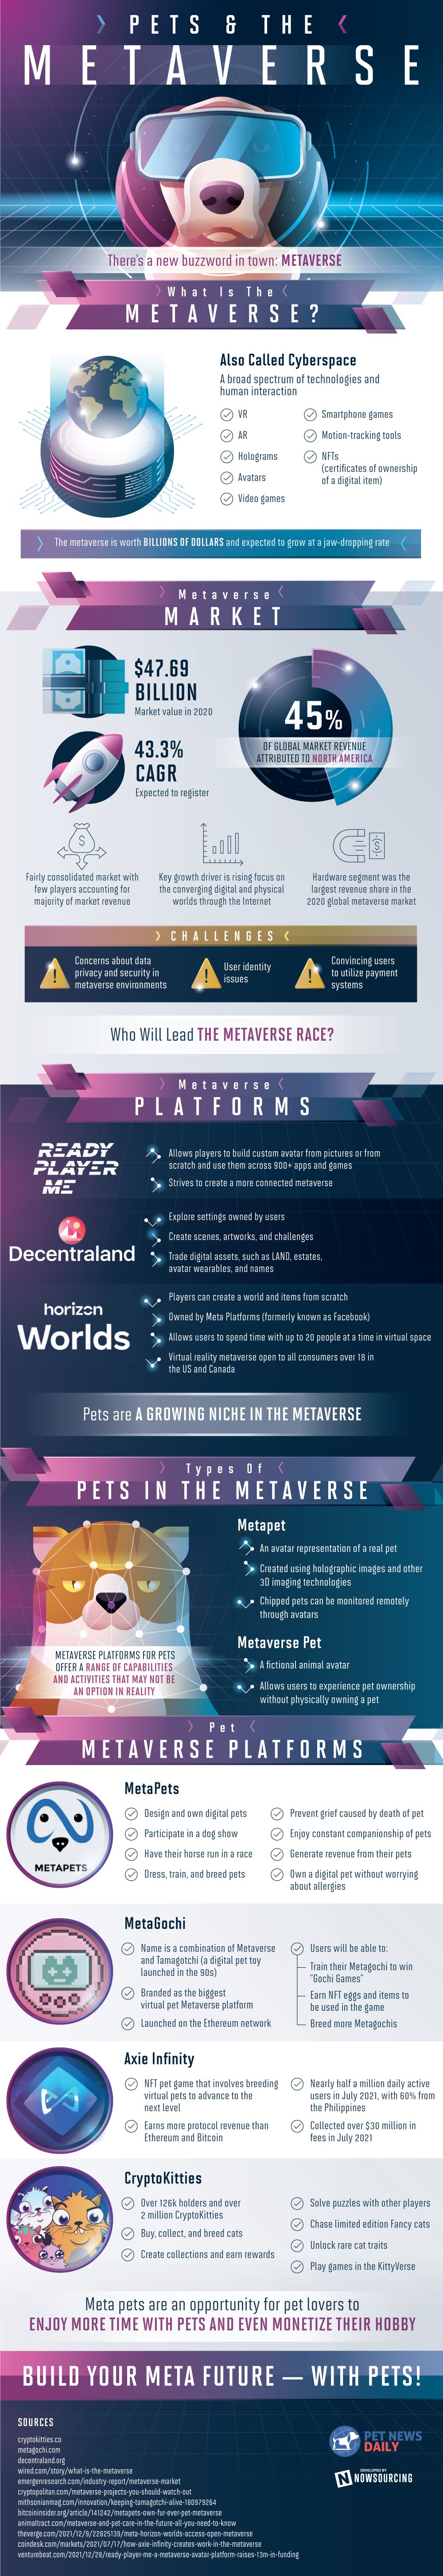 The Endless Possibilities of Pets in the Metaverse